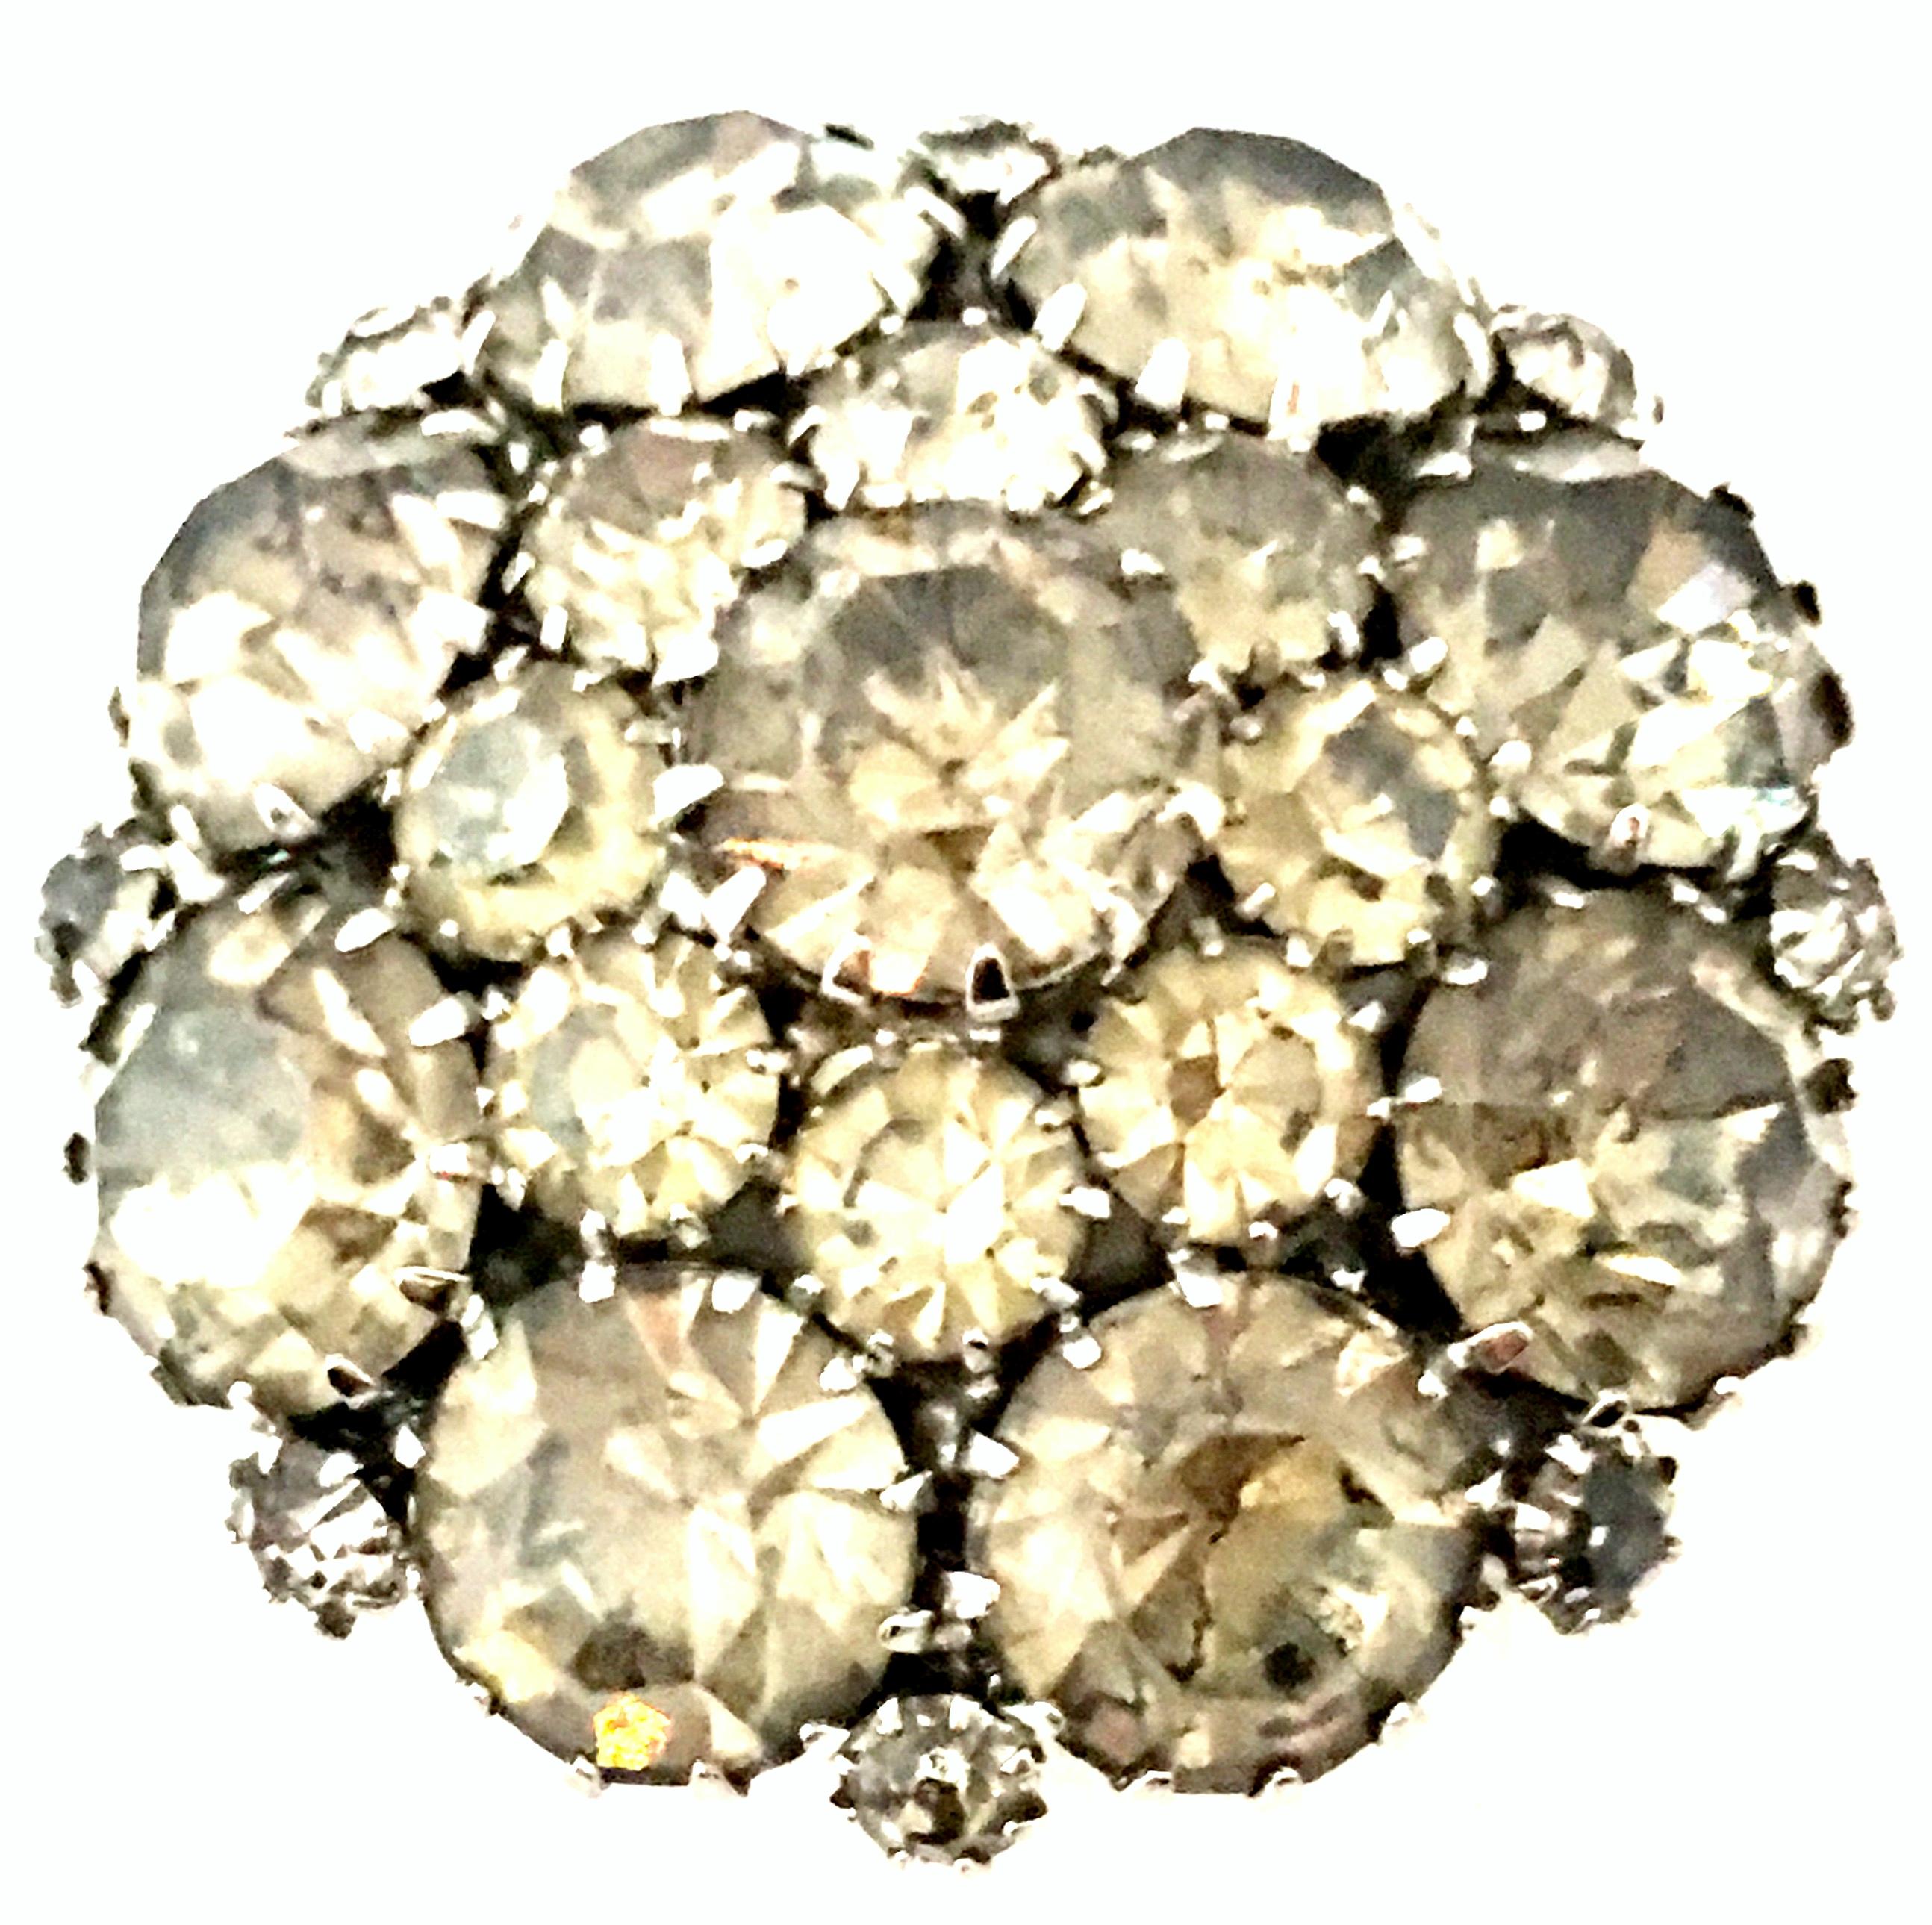 20th Century Silver & Austrian Crystal Schreiner Style Dimensional Dome Brooch. This Schreiner style silver rhodium plate dimensional dome brooch features fancy prong set brilliant cut and faceted smoky topazAustrian crystal stones.
The larger